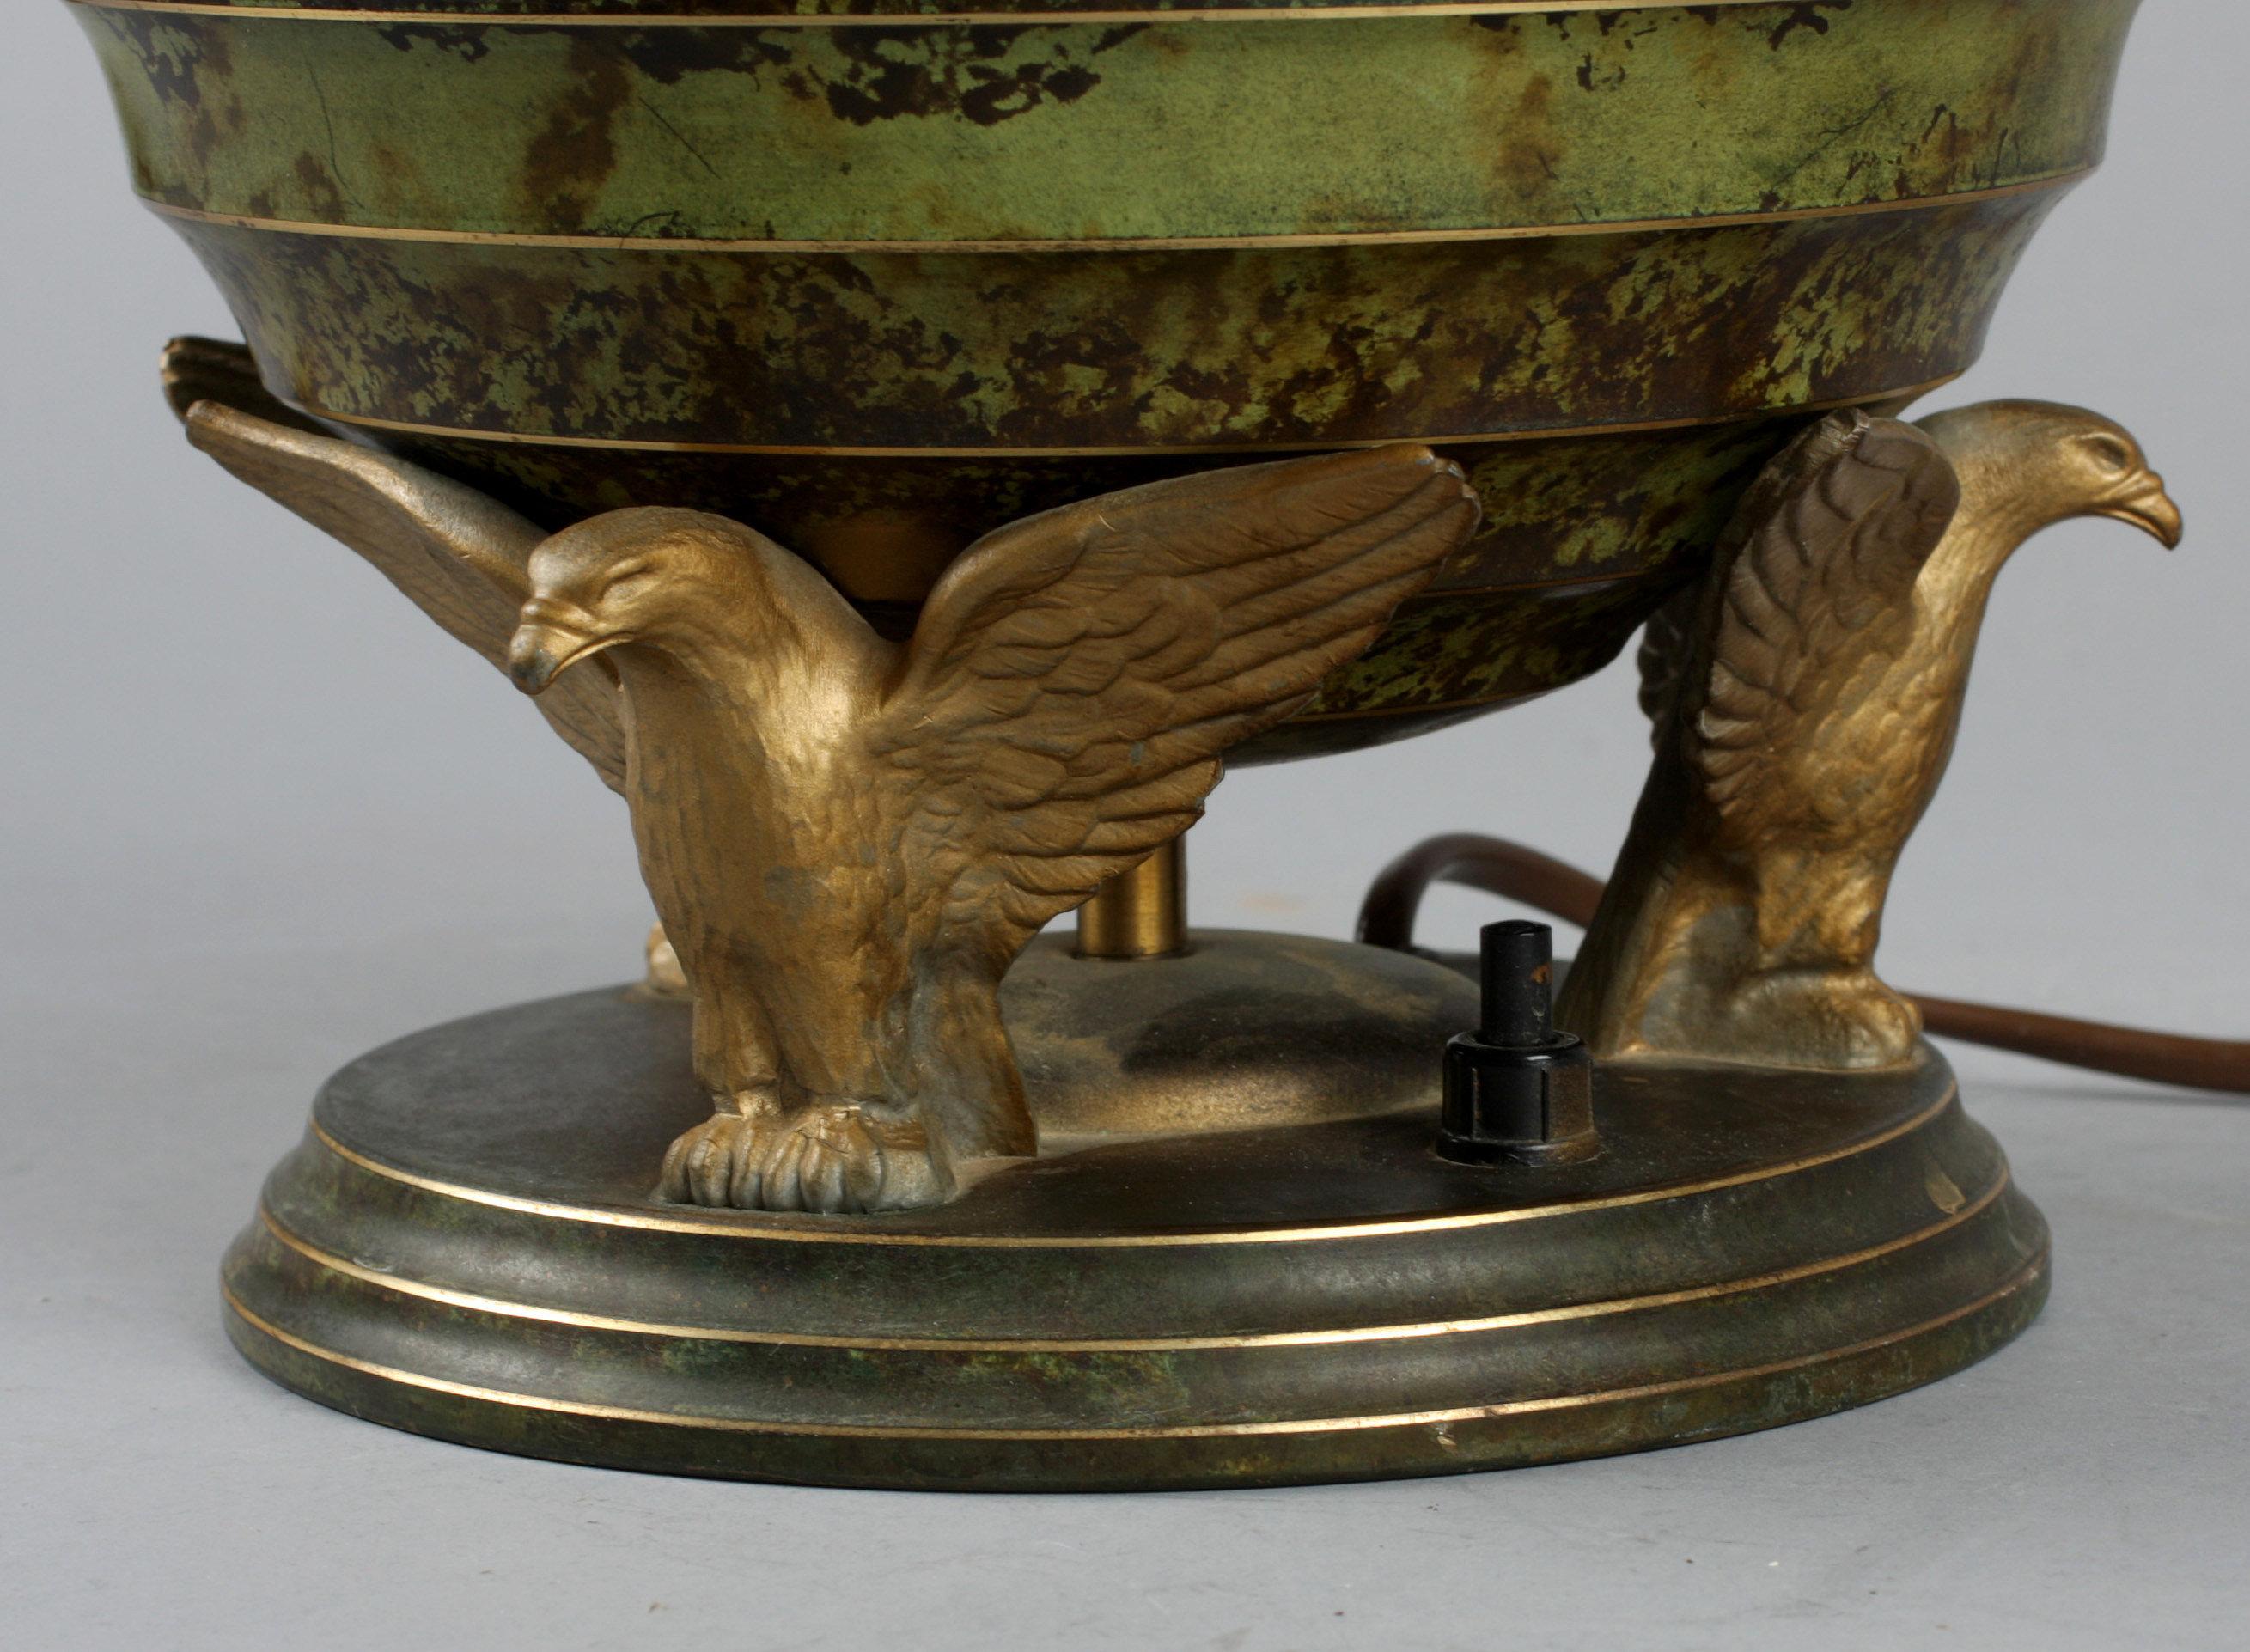 Art déco table lamp in patinated bronze eagles holding a globe, France, 1940.
4 Eagles supporting a bronze globe patinated in various shade of green.
Good condition.